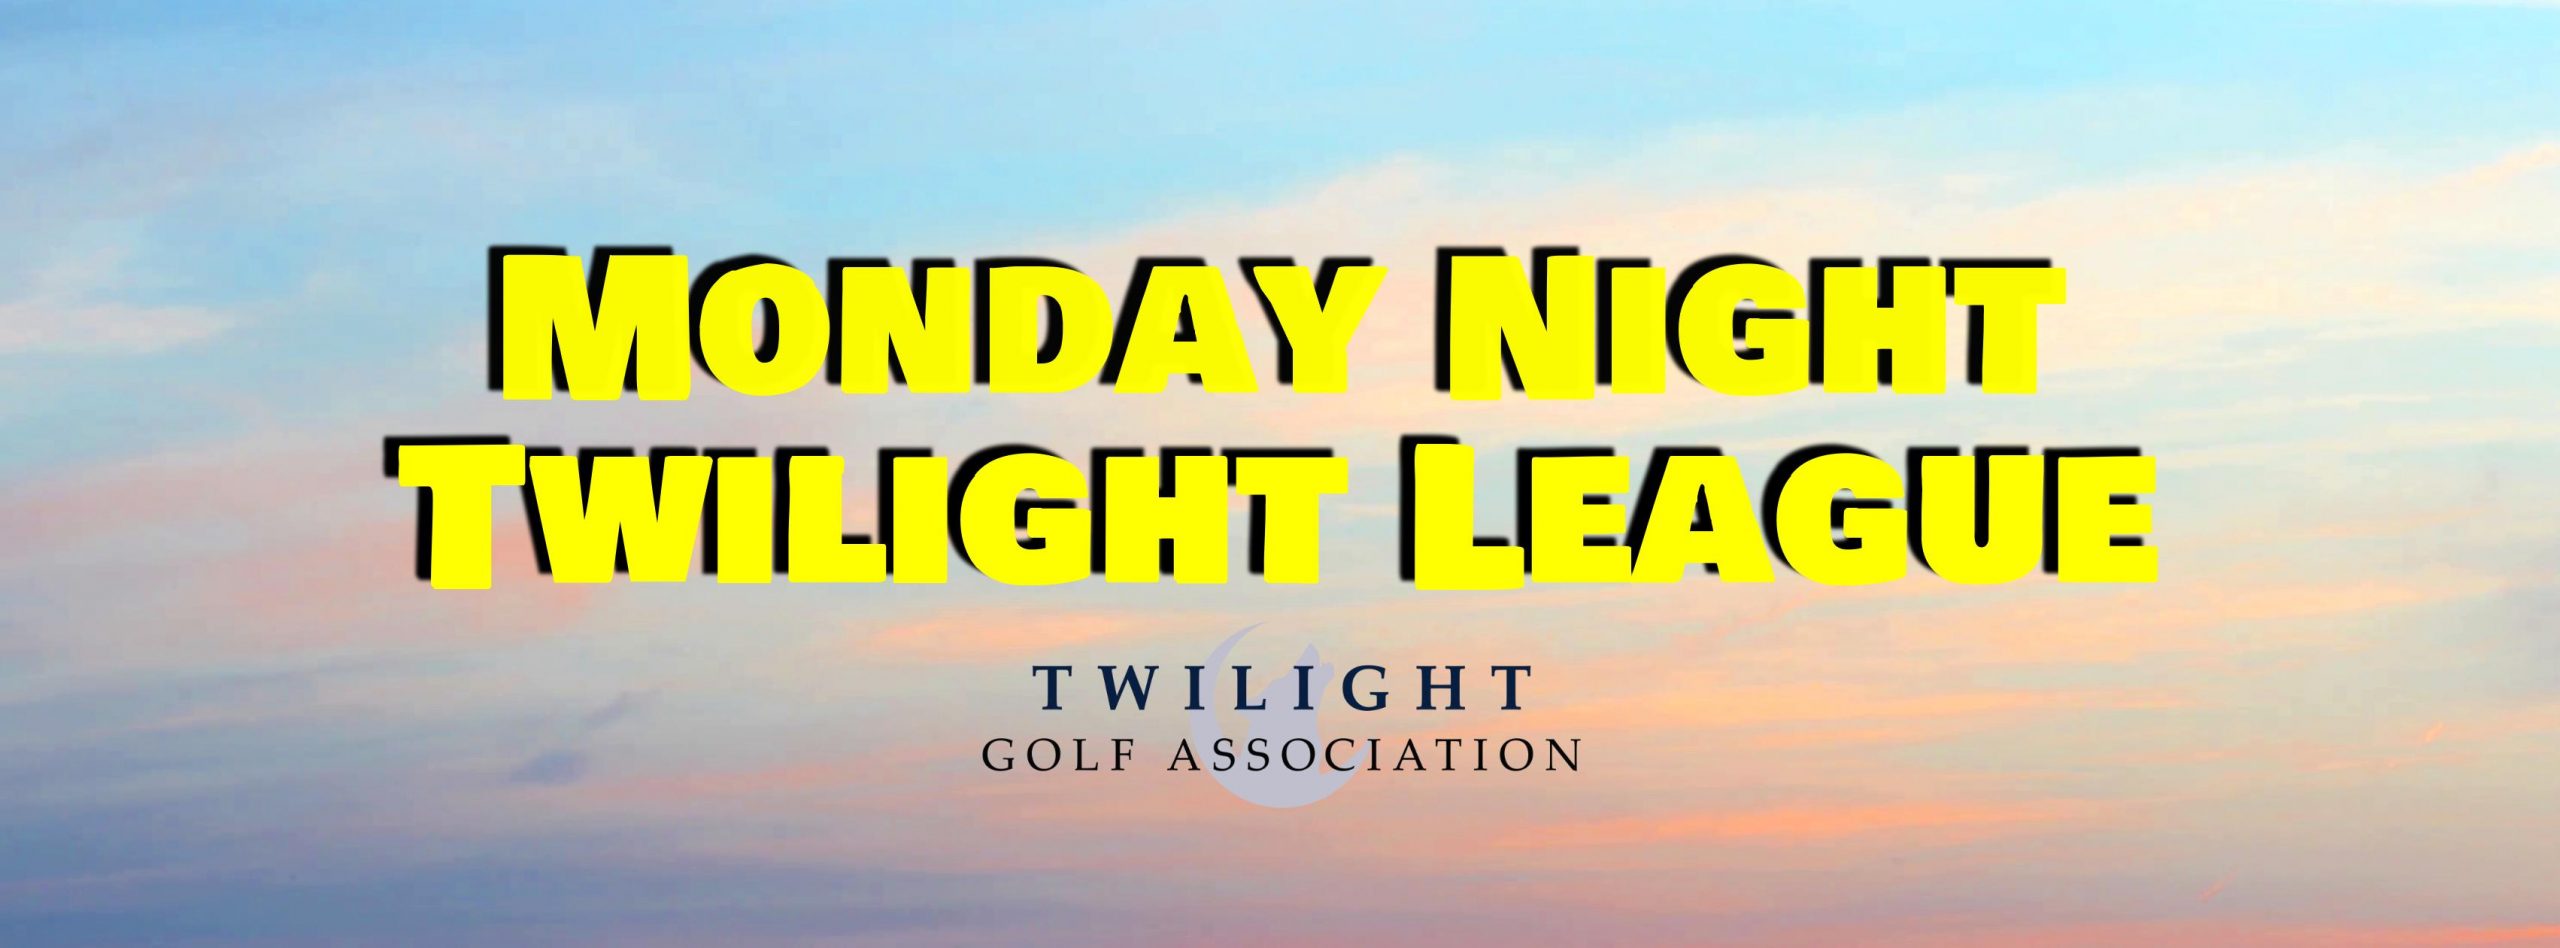 Monday Night Twilight League at Eastlyn Golf Course